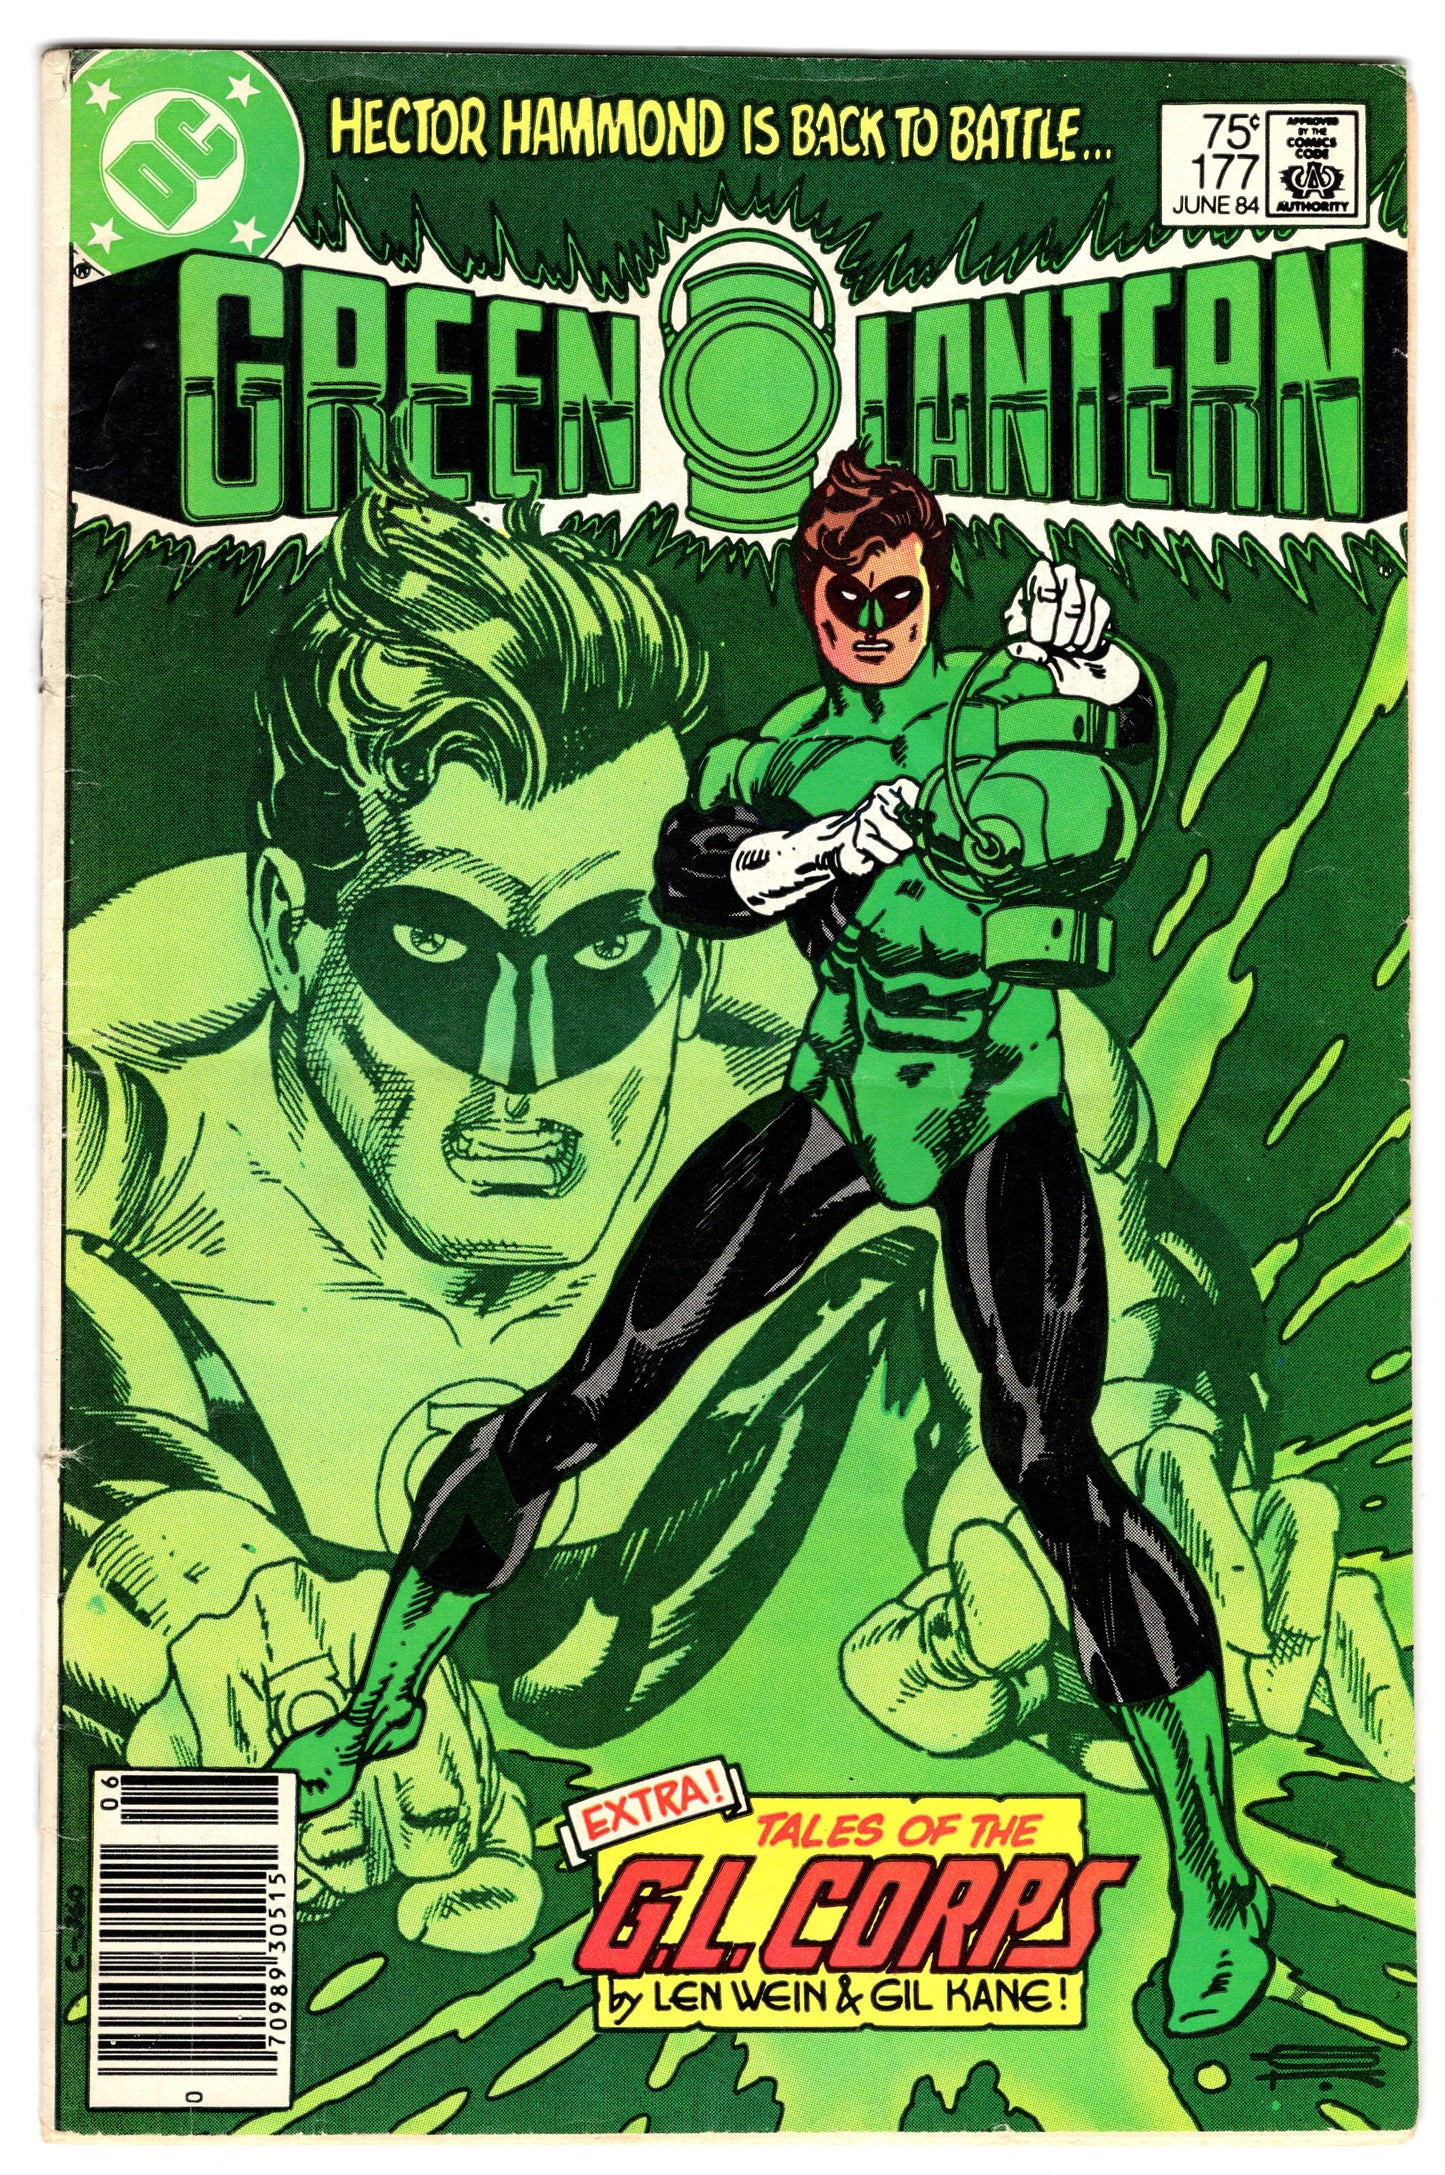 Green Lantern - Issue #177 "Tales of the G.L. Corps" (June, 1984 - Marvel Comics) VG+